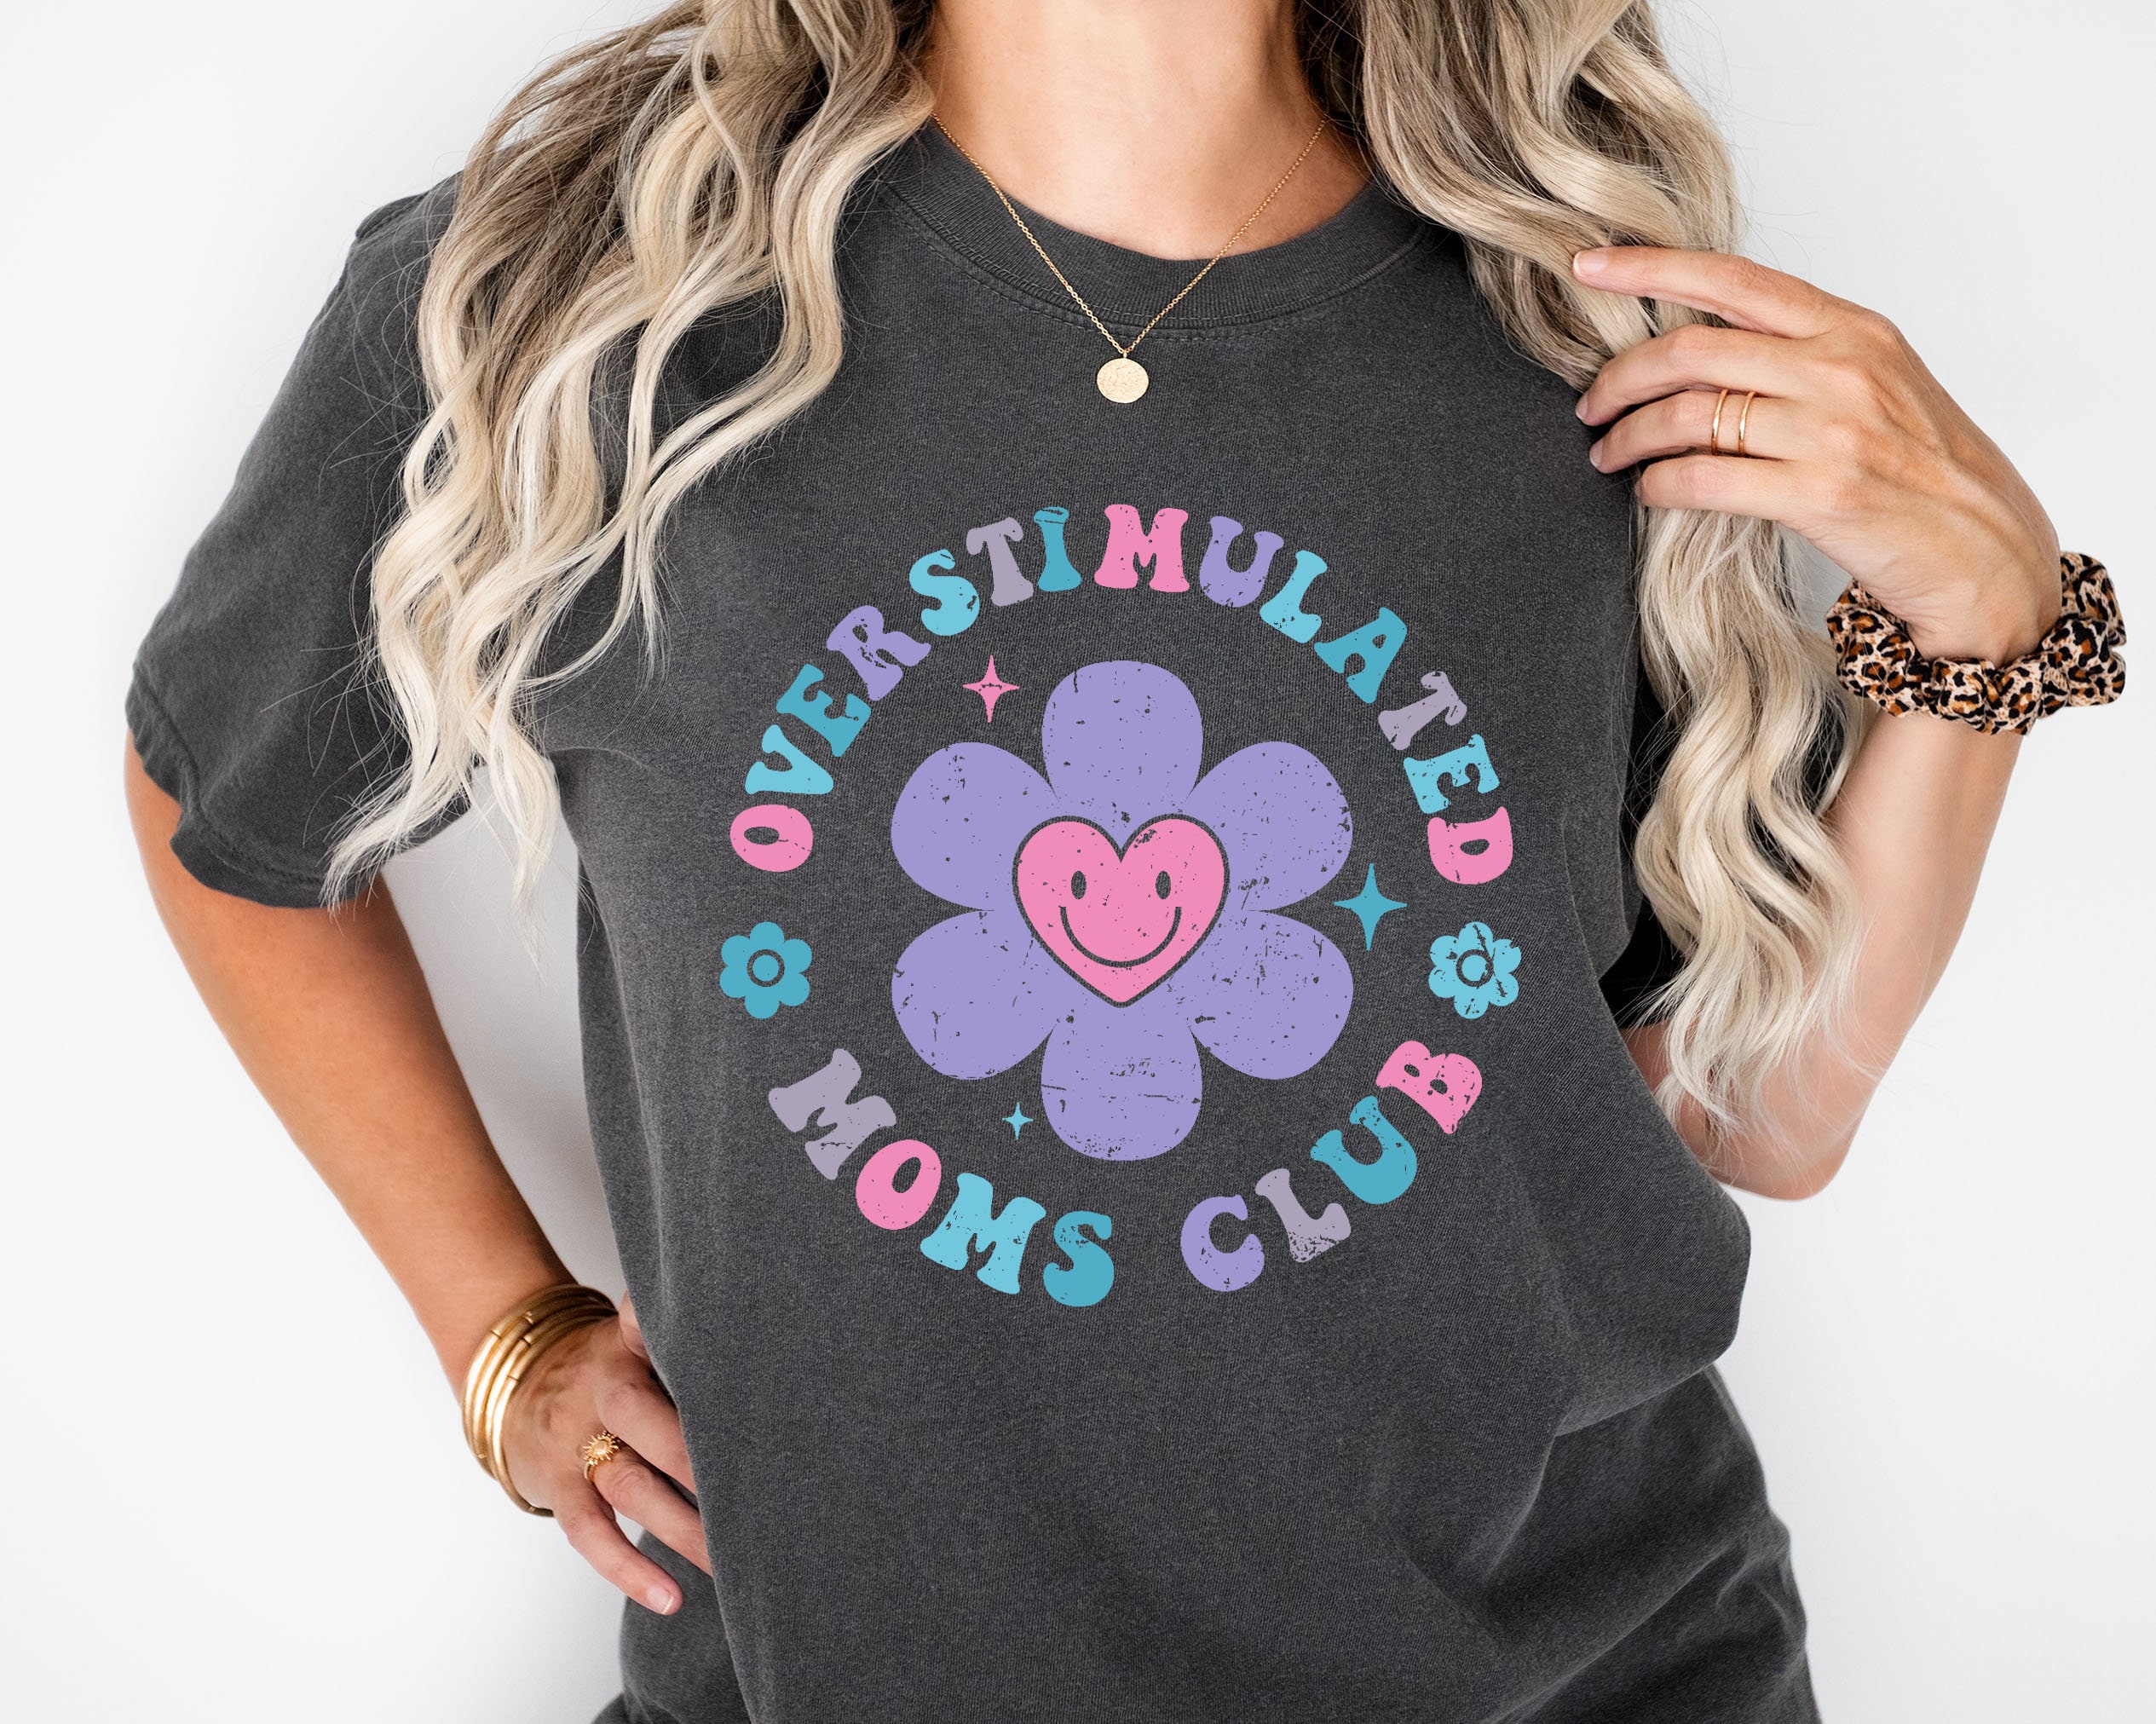 Overstimulated Mom Club Shirt, Mother's Day Shirt, Mom Life Shirt, Mama Shirt, Mom Vibes Shirt, Motherhood Shirt, Funny Mom Shirt